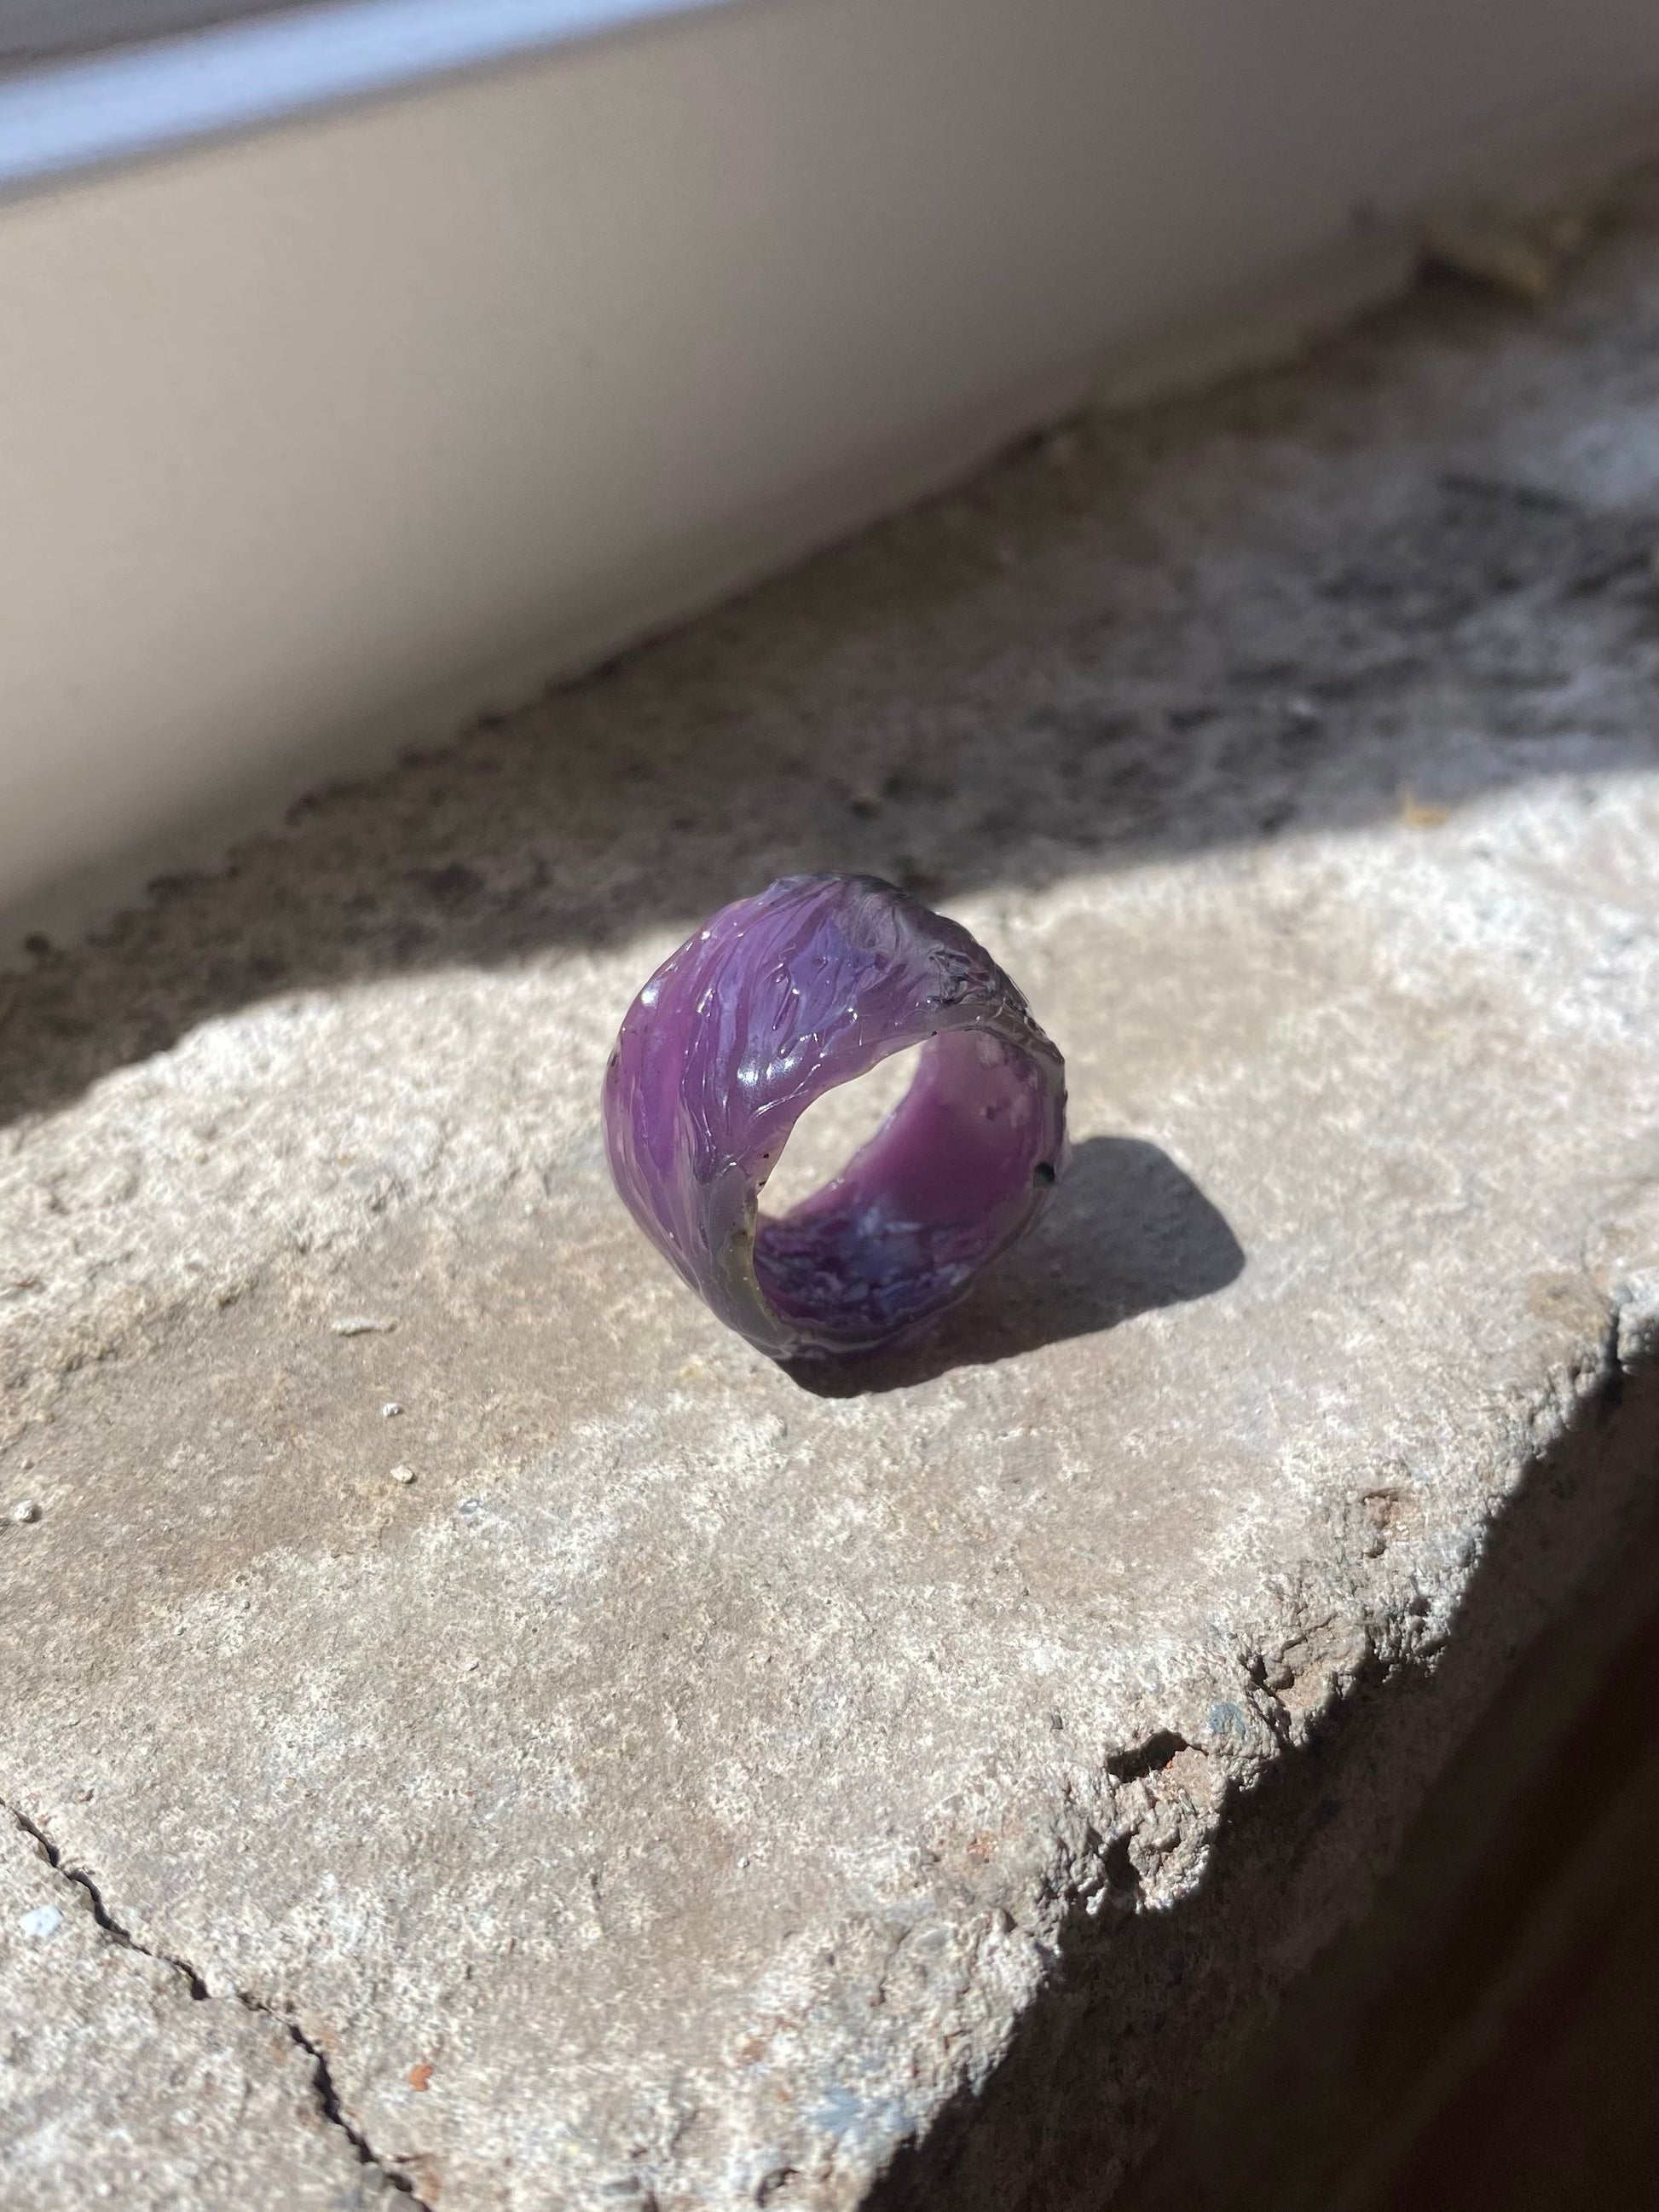 Lost wax textured ring model on concrete surface